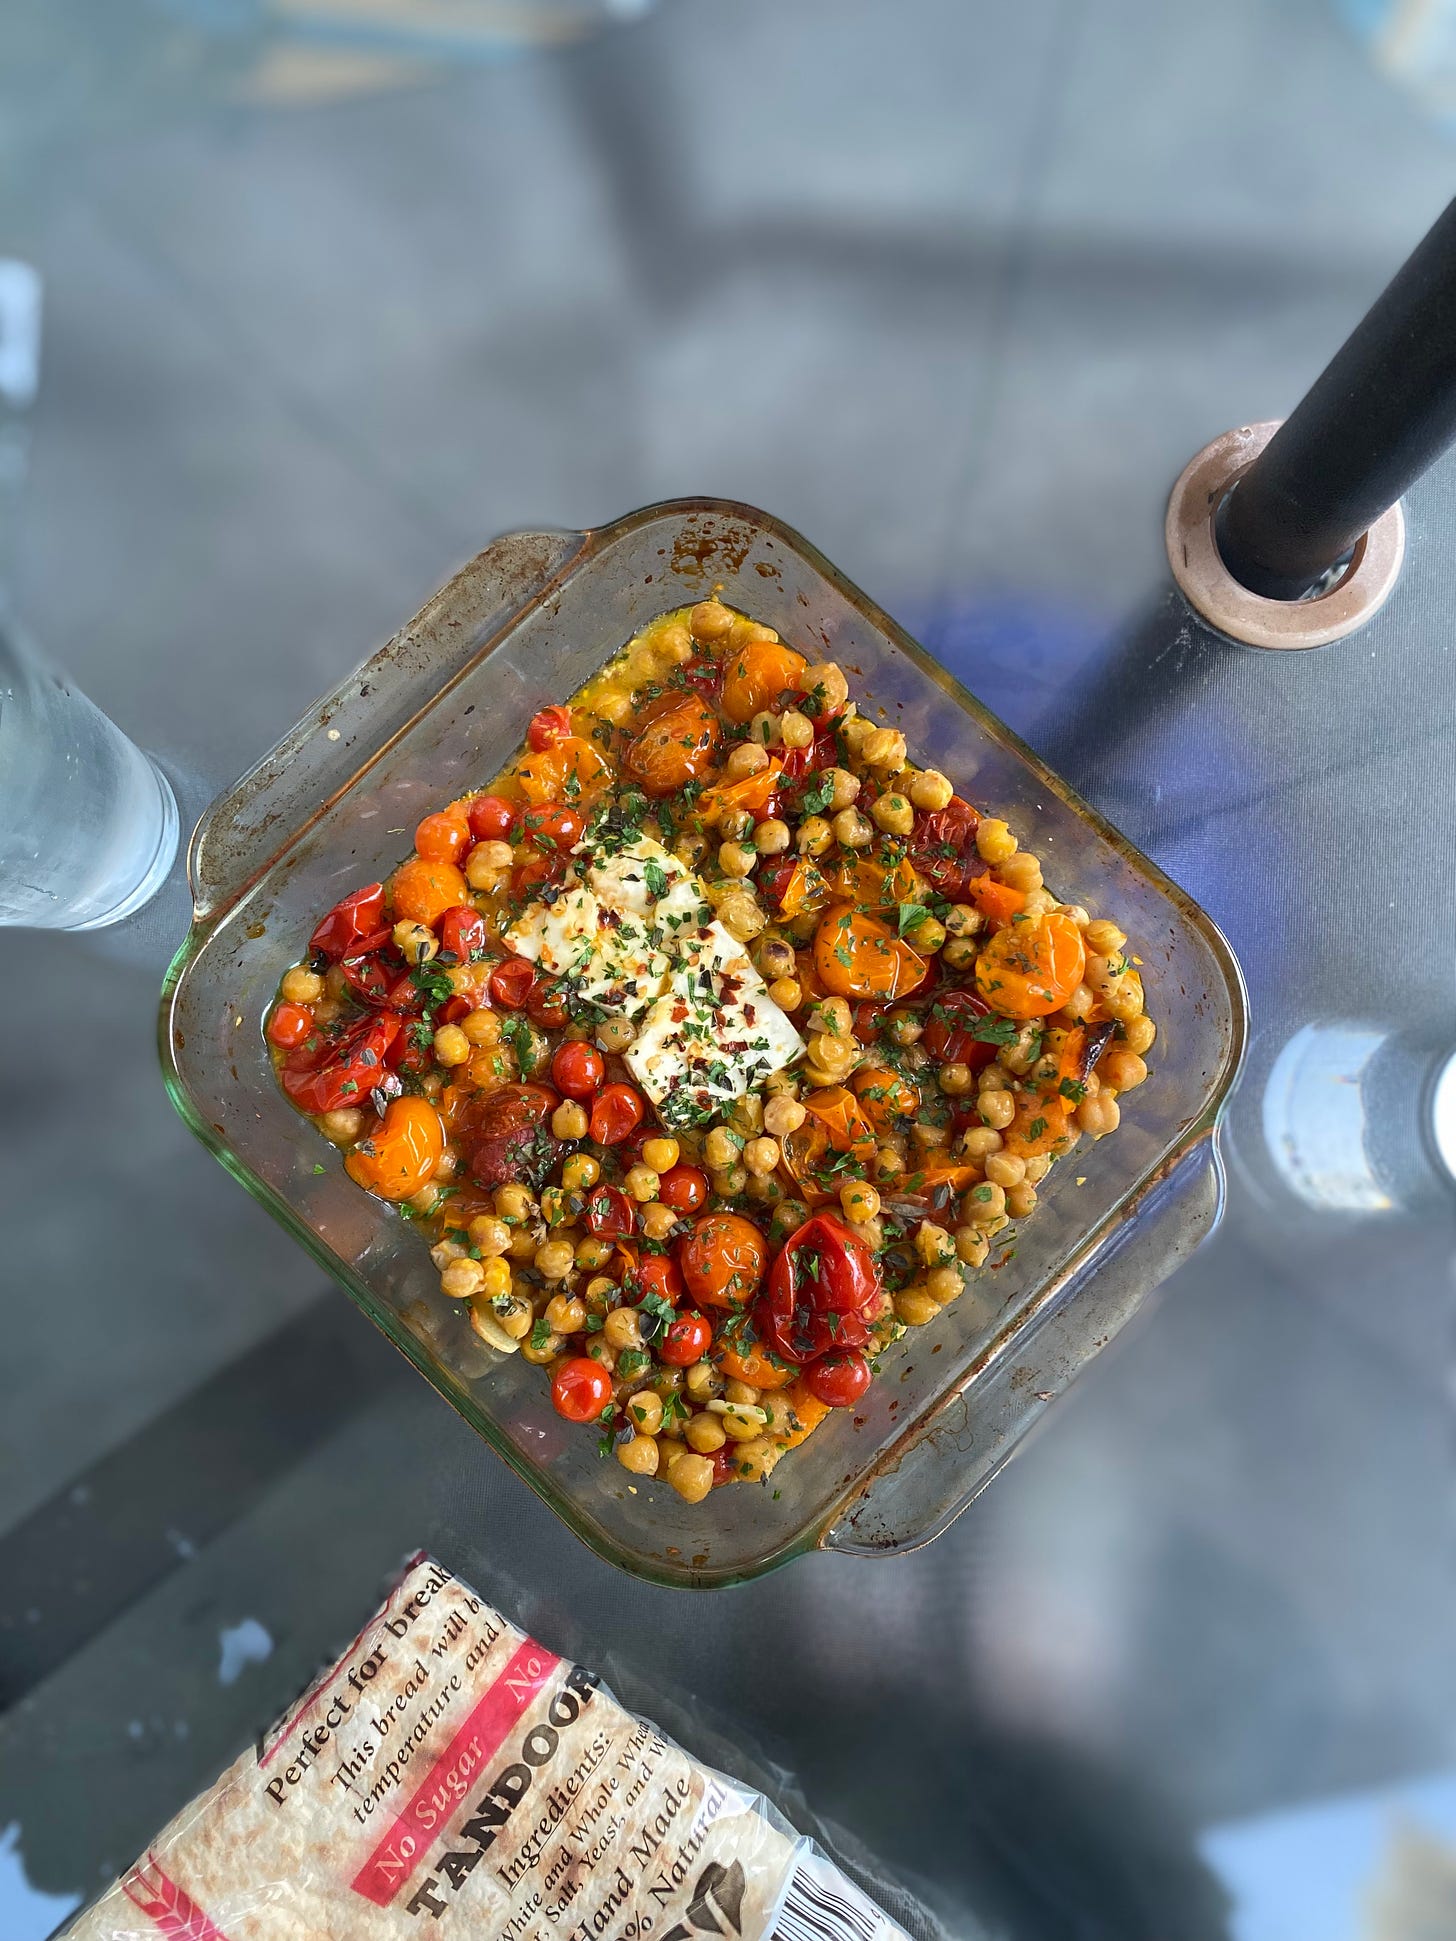 A clear, but stained, square pyrex baking dish full of orange and red small tomatoes mixed with chickpeas. In the middle is a somewhat rectangular piece of feta. Everything is sprinkled with chili flakes and chopped herbs. Just visible in the bottom of the photo is a package of taftoon.